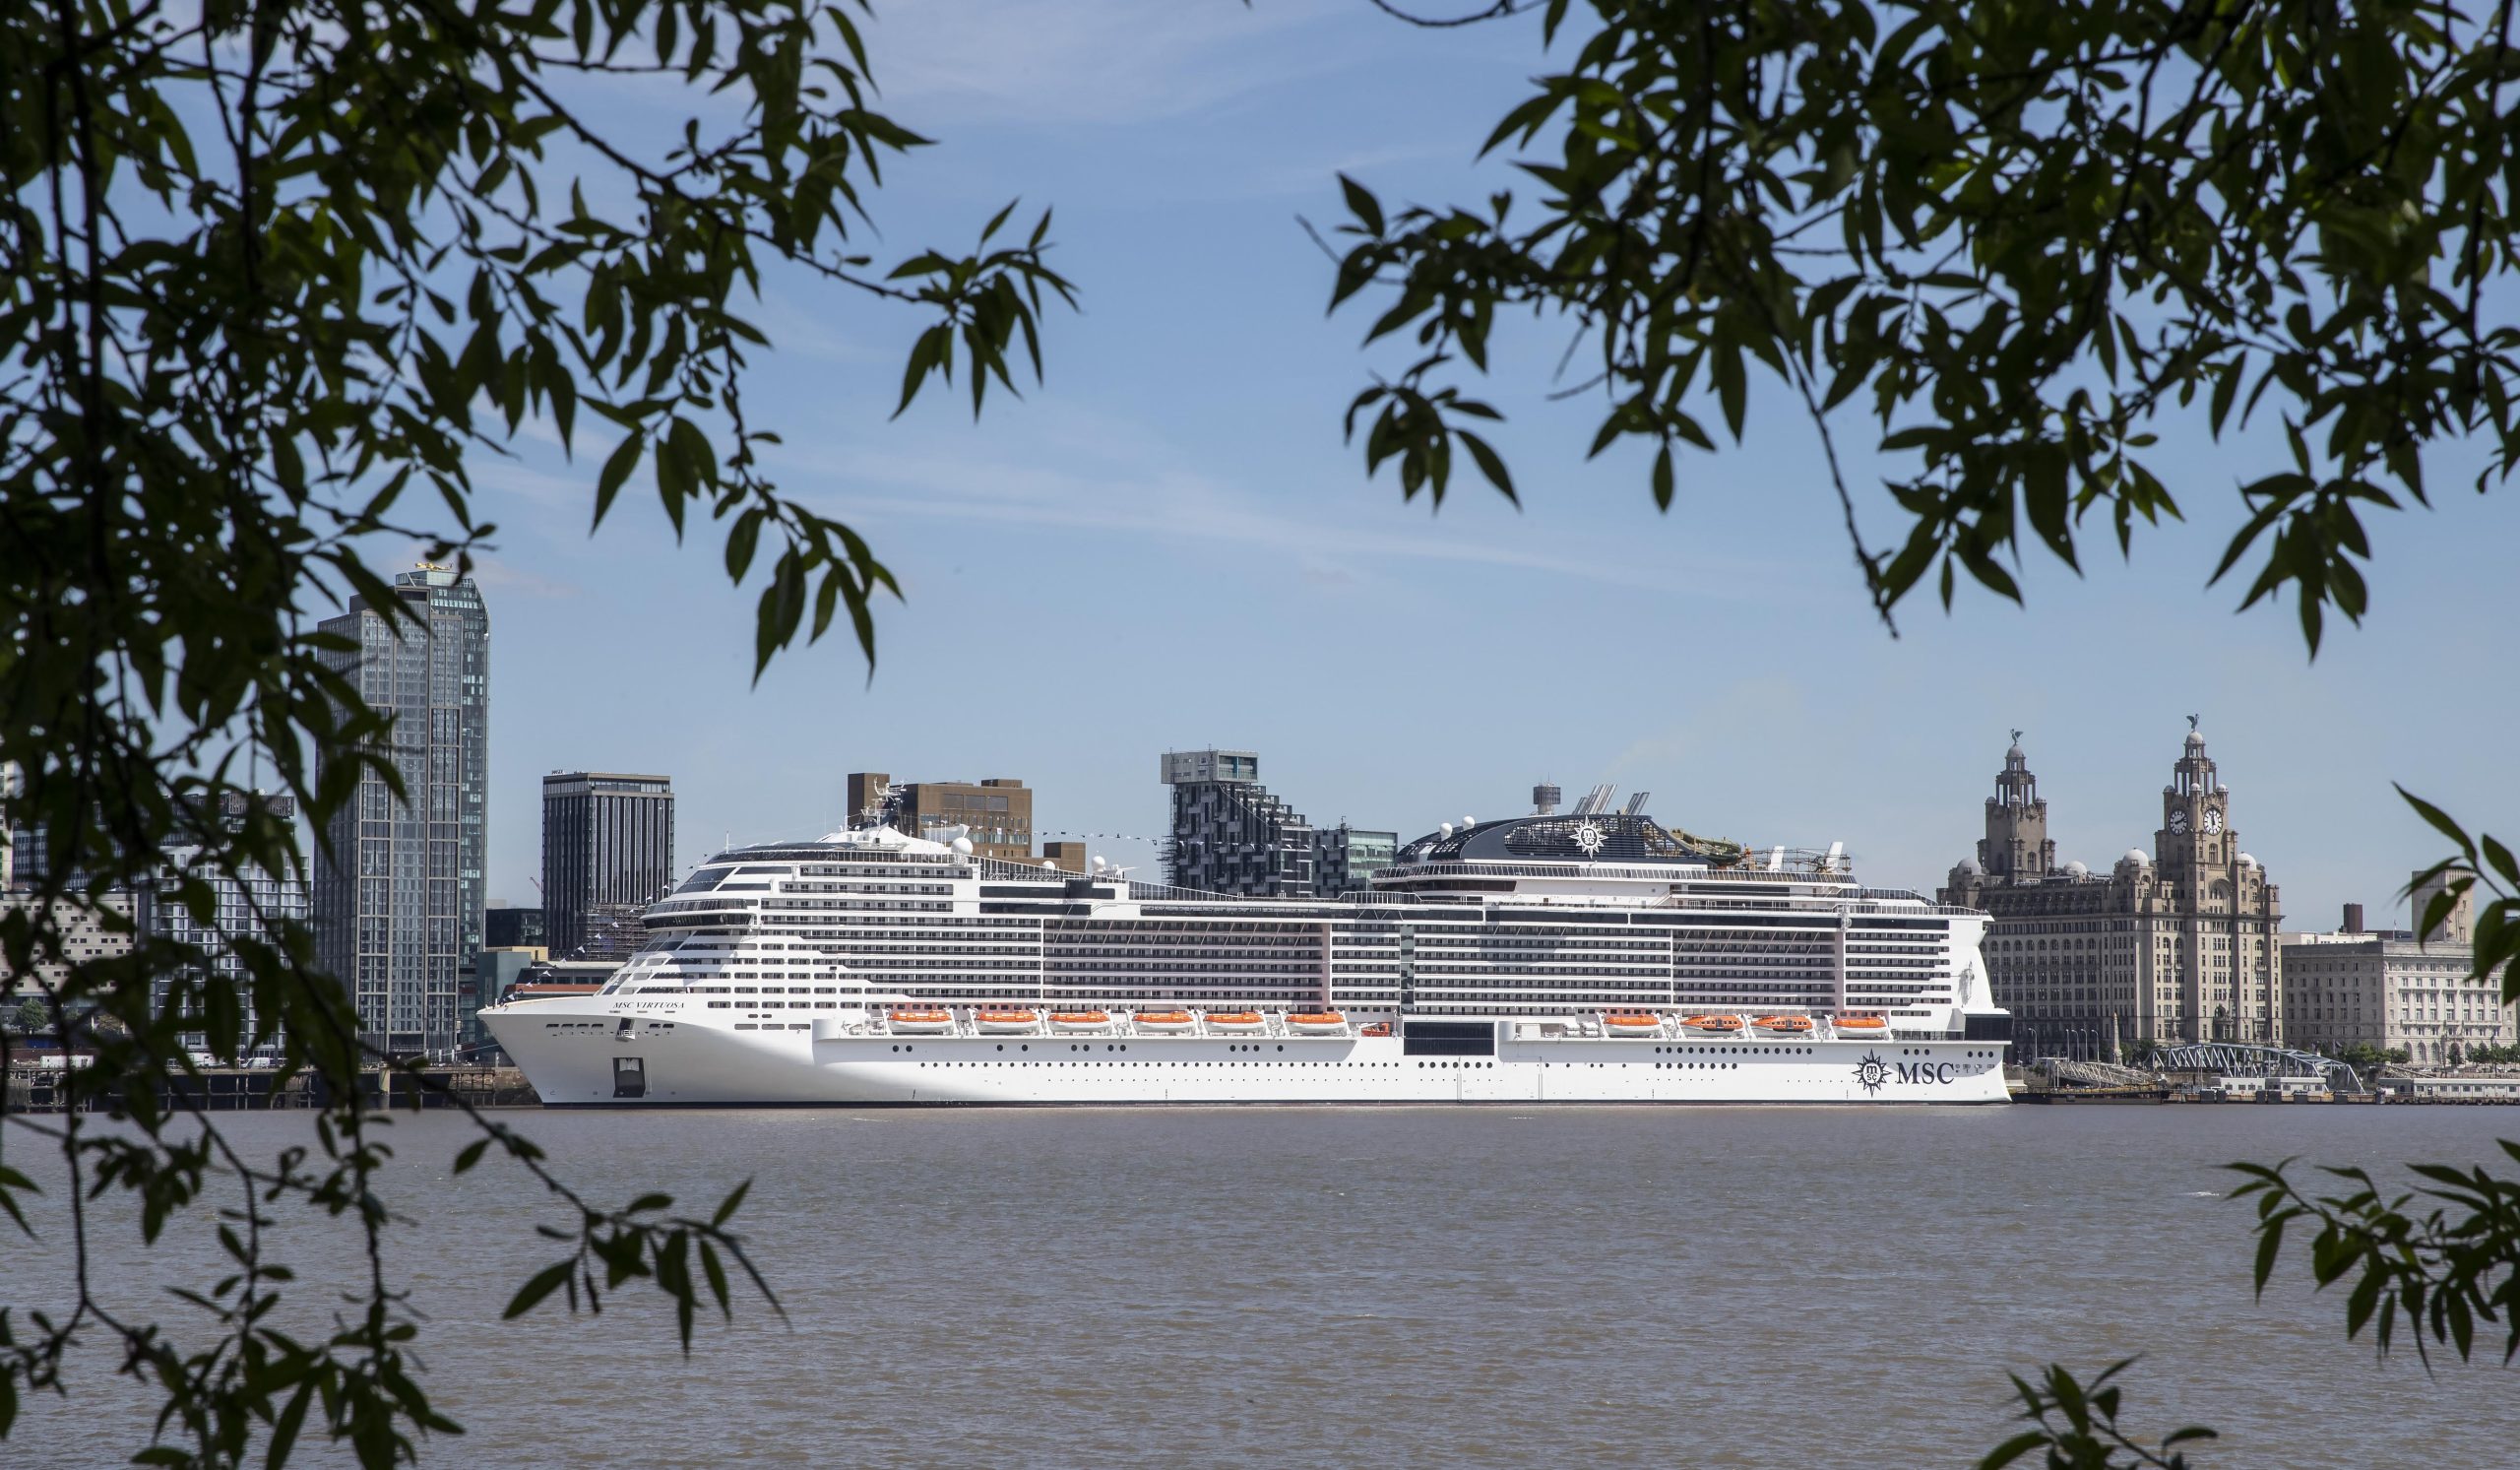 msc cruise ship in liverpool today